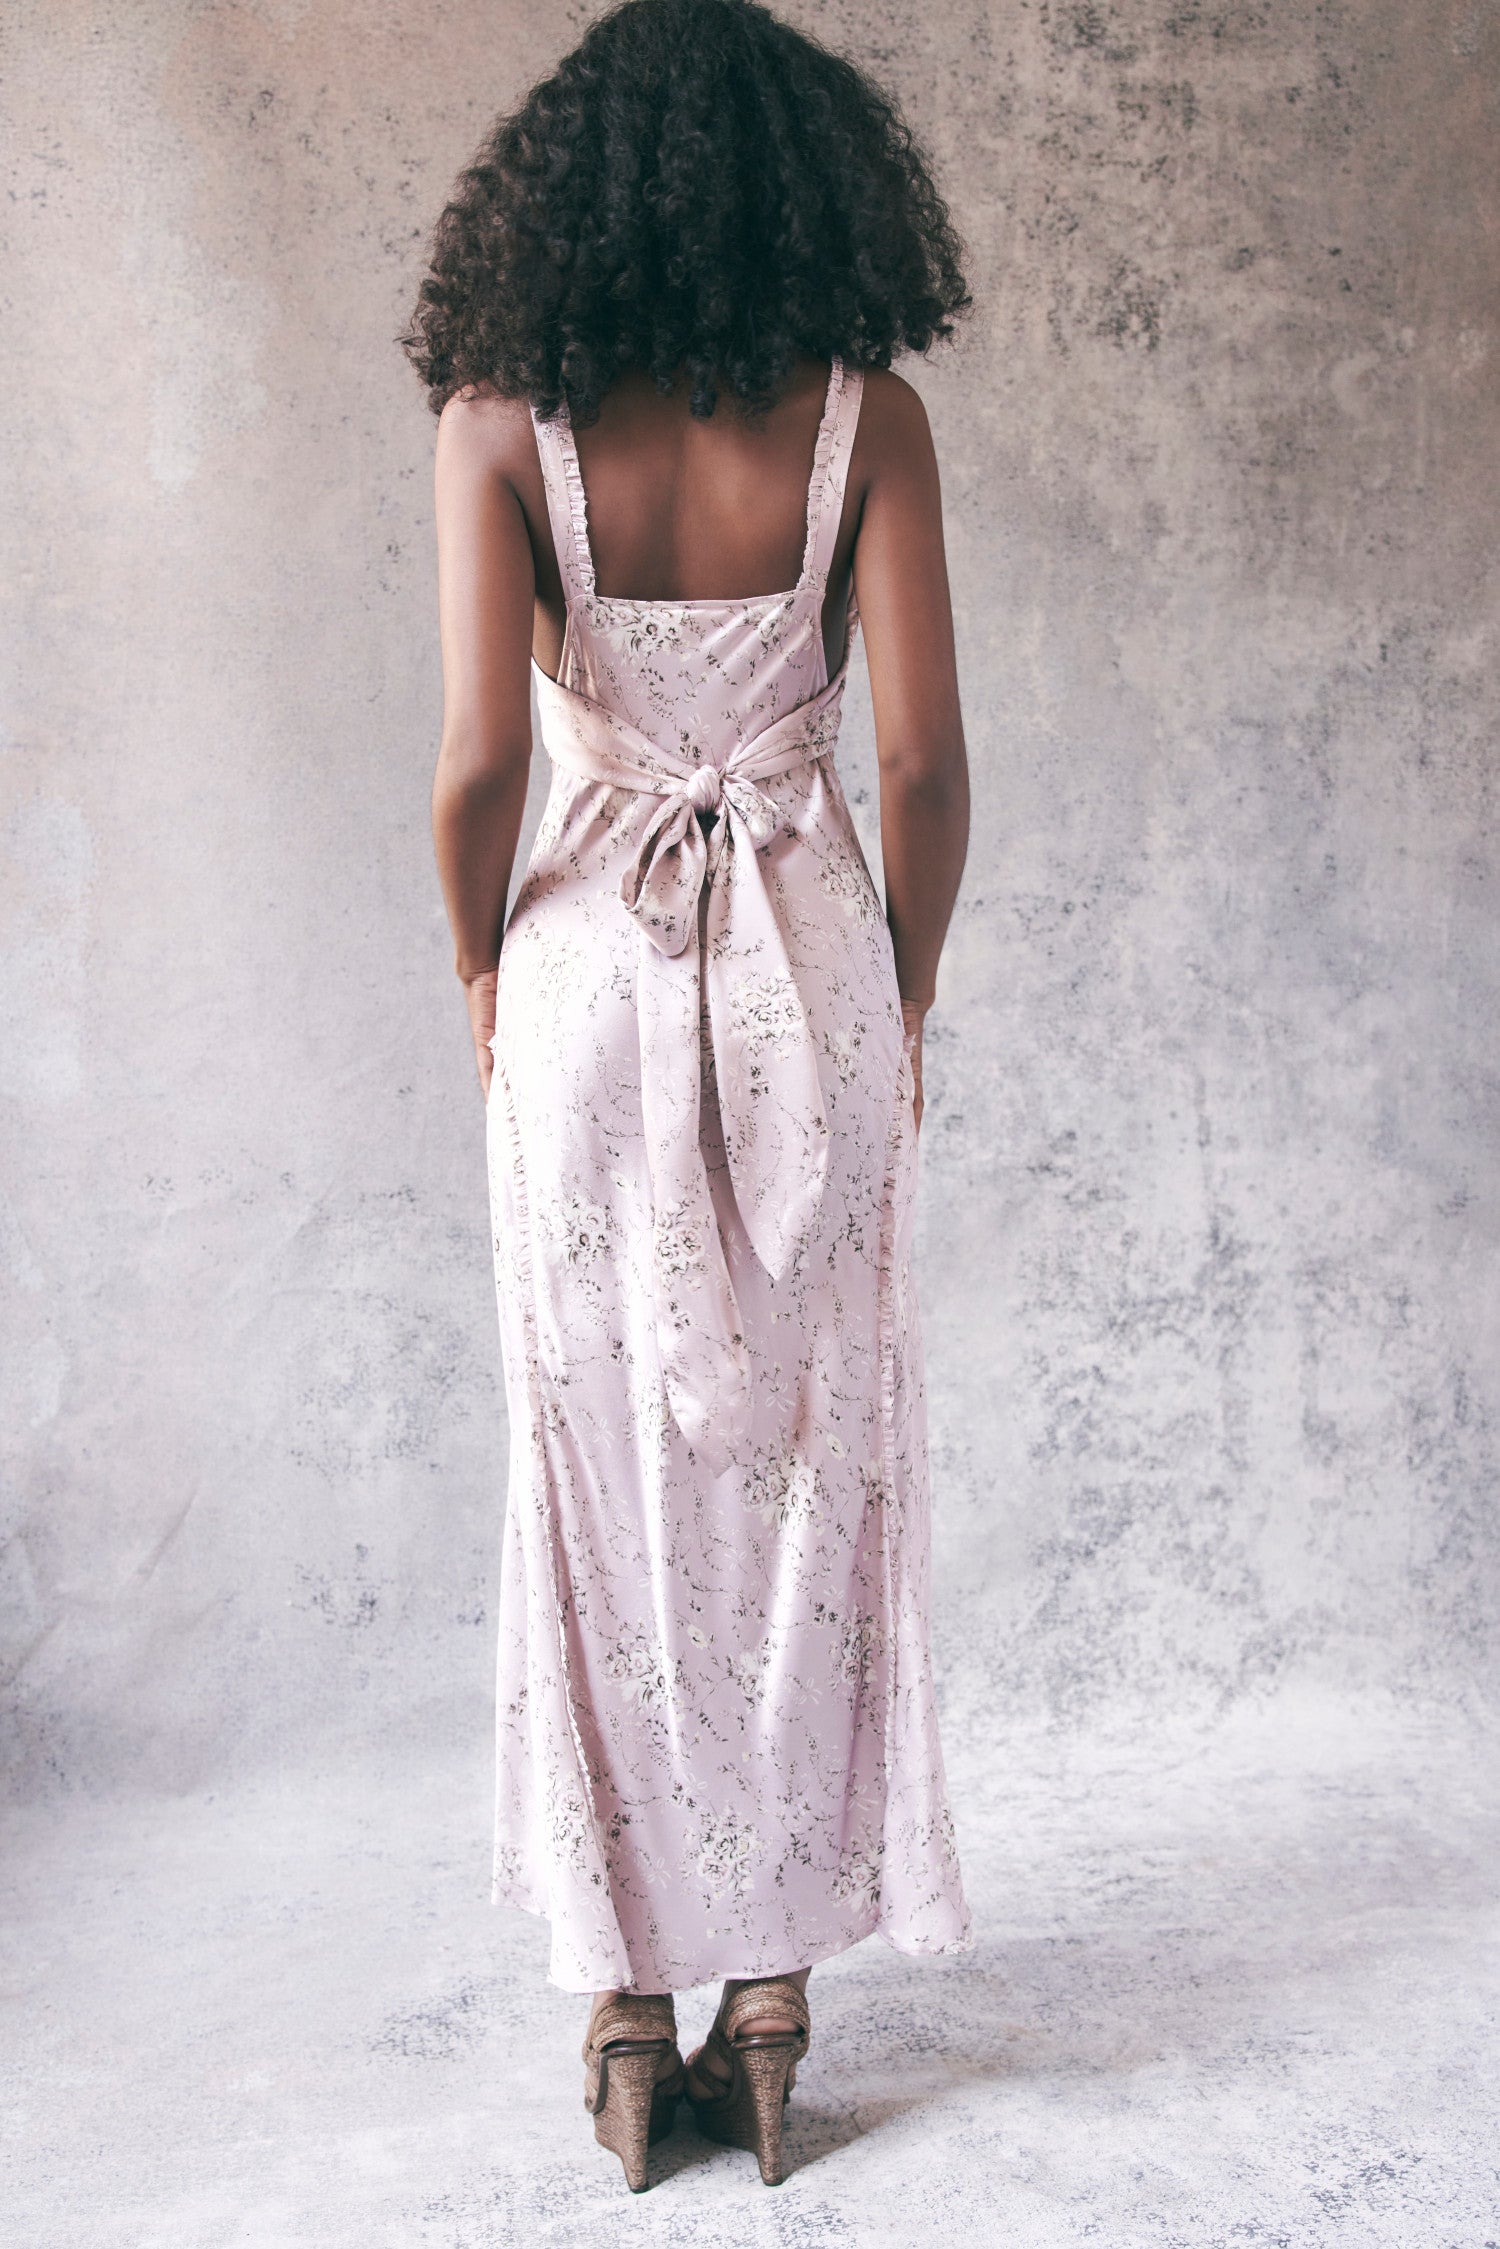 Back image of model wearing light pink floral maxi dress with ruffle trim detail and bow to tie on back